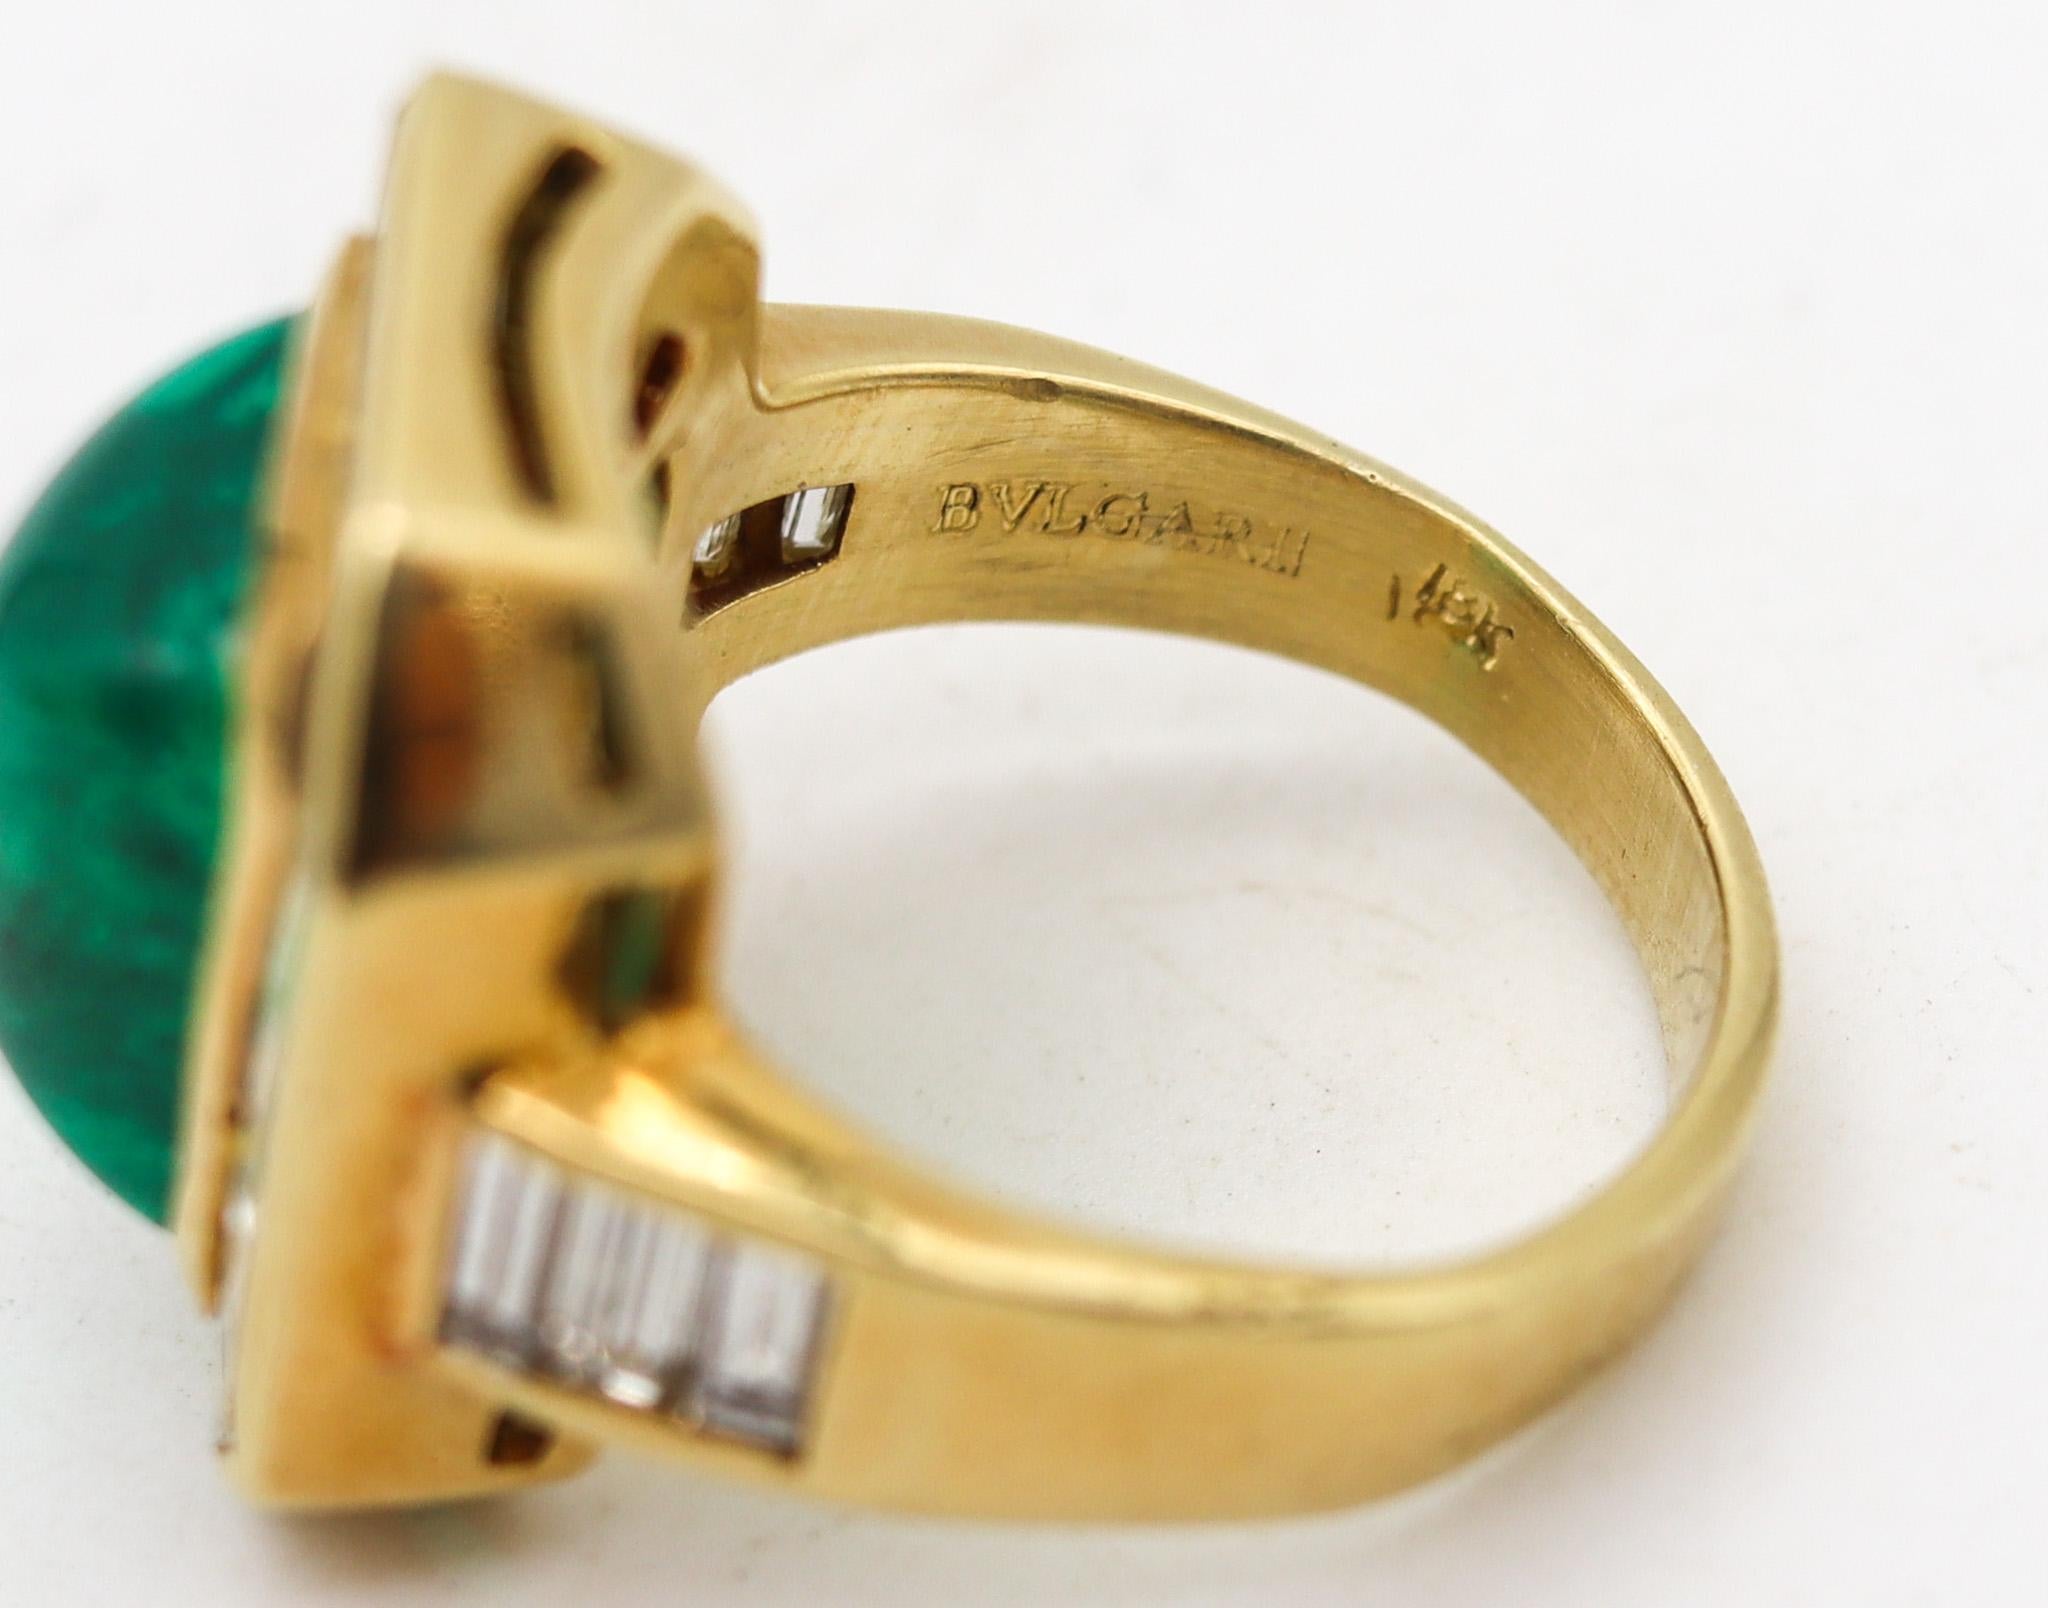 Women's or Men's Bvlgari Cocktail Ring In 18Kt Yellow Gold With 9.04 Ctw In Diamonds And Emerald